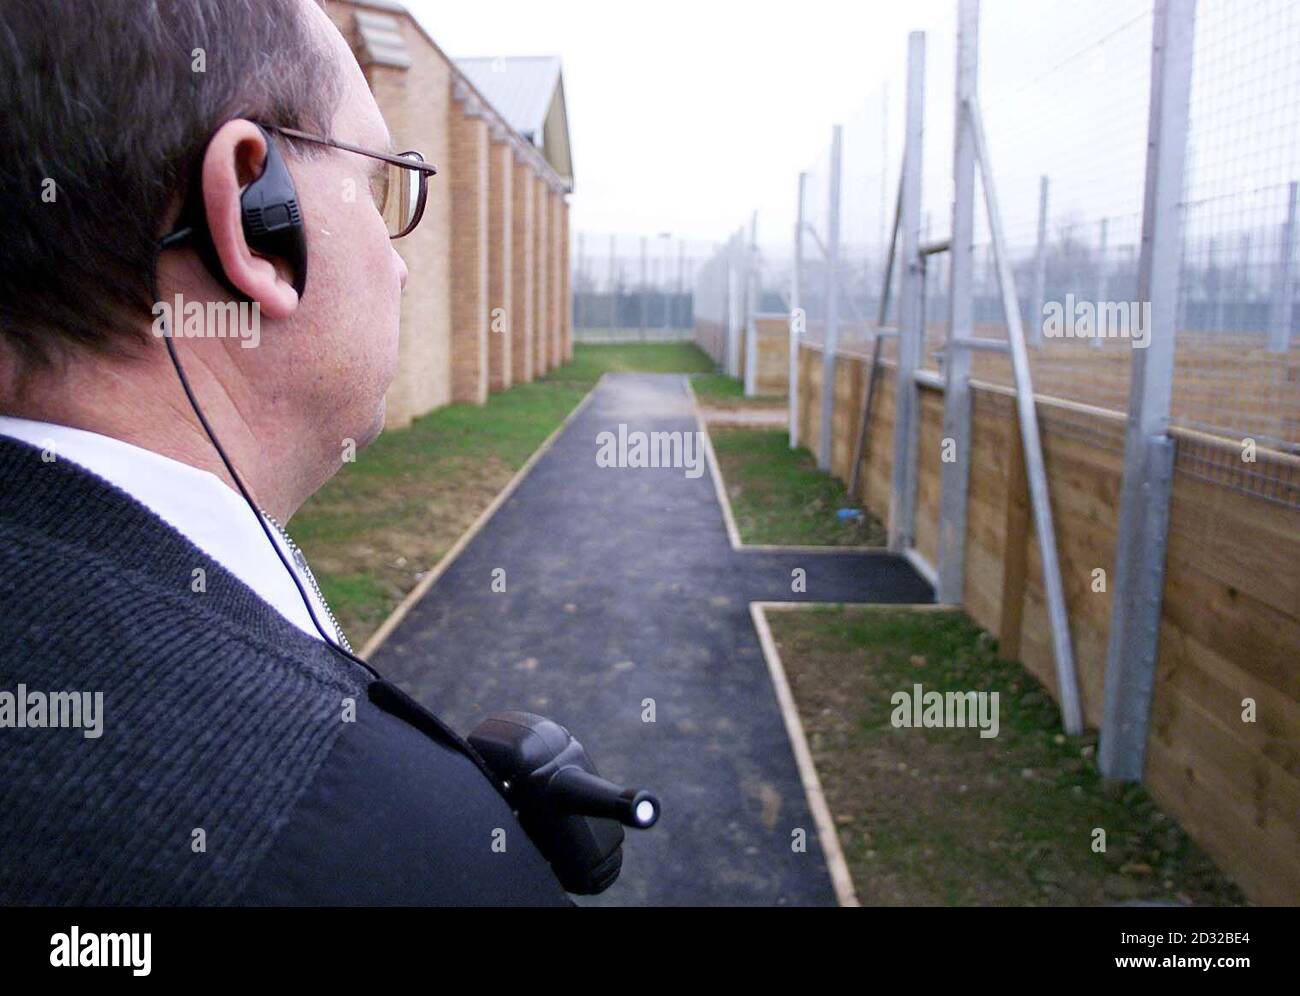 A security guard surveys the boundaries of Yarl's Wood, Europe's largest detention centre for asylum seekers which was unveiled. The massive facility is on a former Ministry of Defence base near Bedford. * .... and forms part of Home Secretary David Blunkett's pledge to remove 30,000 failed asylum seekers from the country a year. Yarl's Wood, which is thought to have cost 100 million to build, will hold 900 detainees who have exhausted their attempts to win asylum in the UK, plus other immigration offenders. Stock Photo